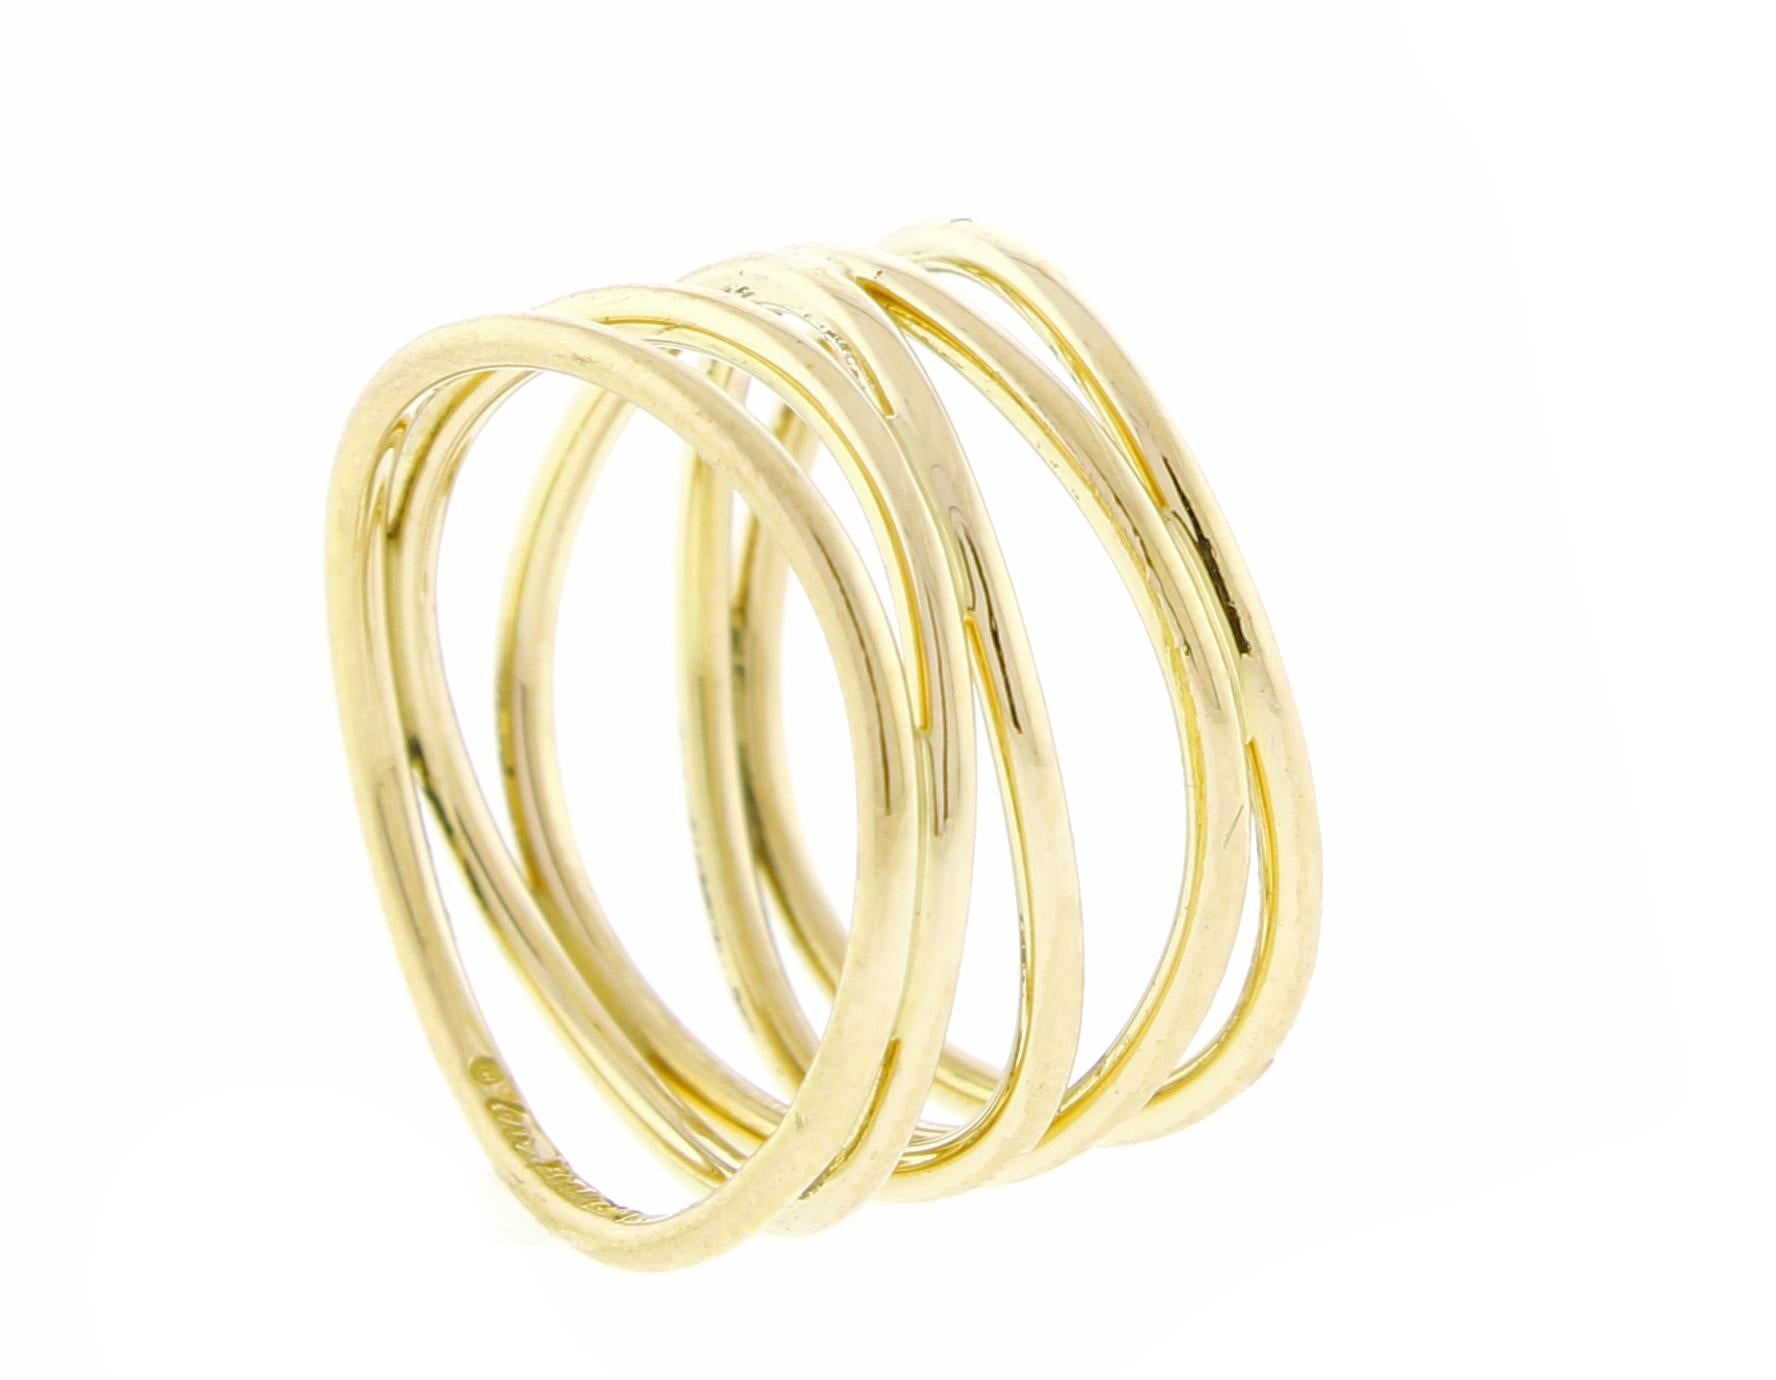 Inspired by Elsa Peretti’s love of the natural world, the Wave collection recalls the fluid lines of the undulating sea. Elegant rows of 18k gold make a modern style statement in this five-row ring.

18 karat gold
Size 5 ½